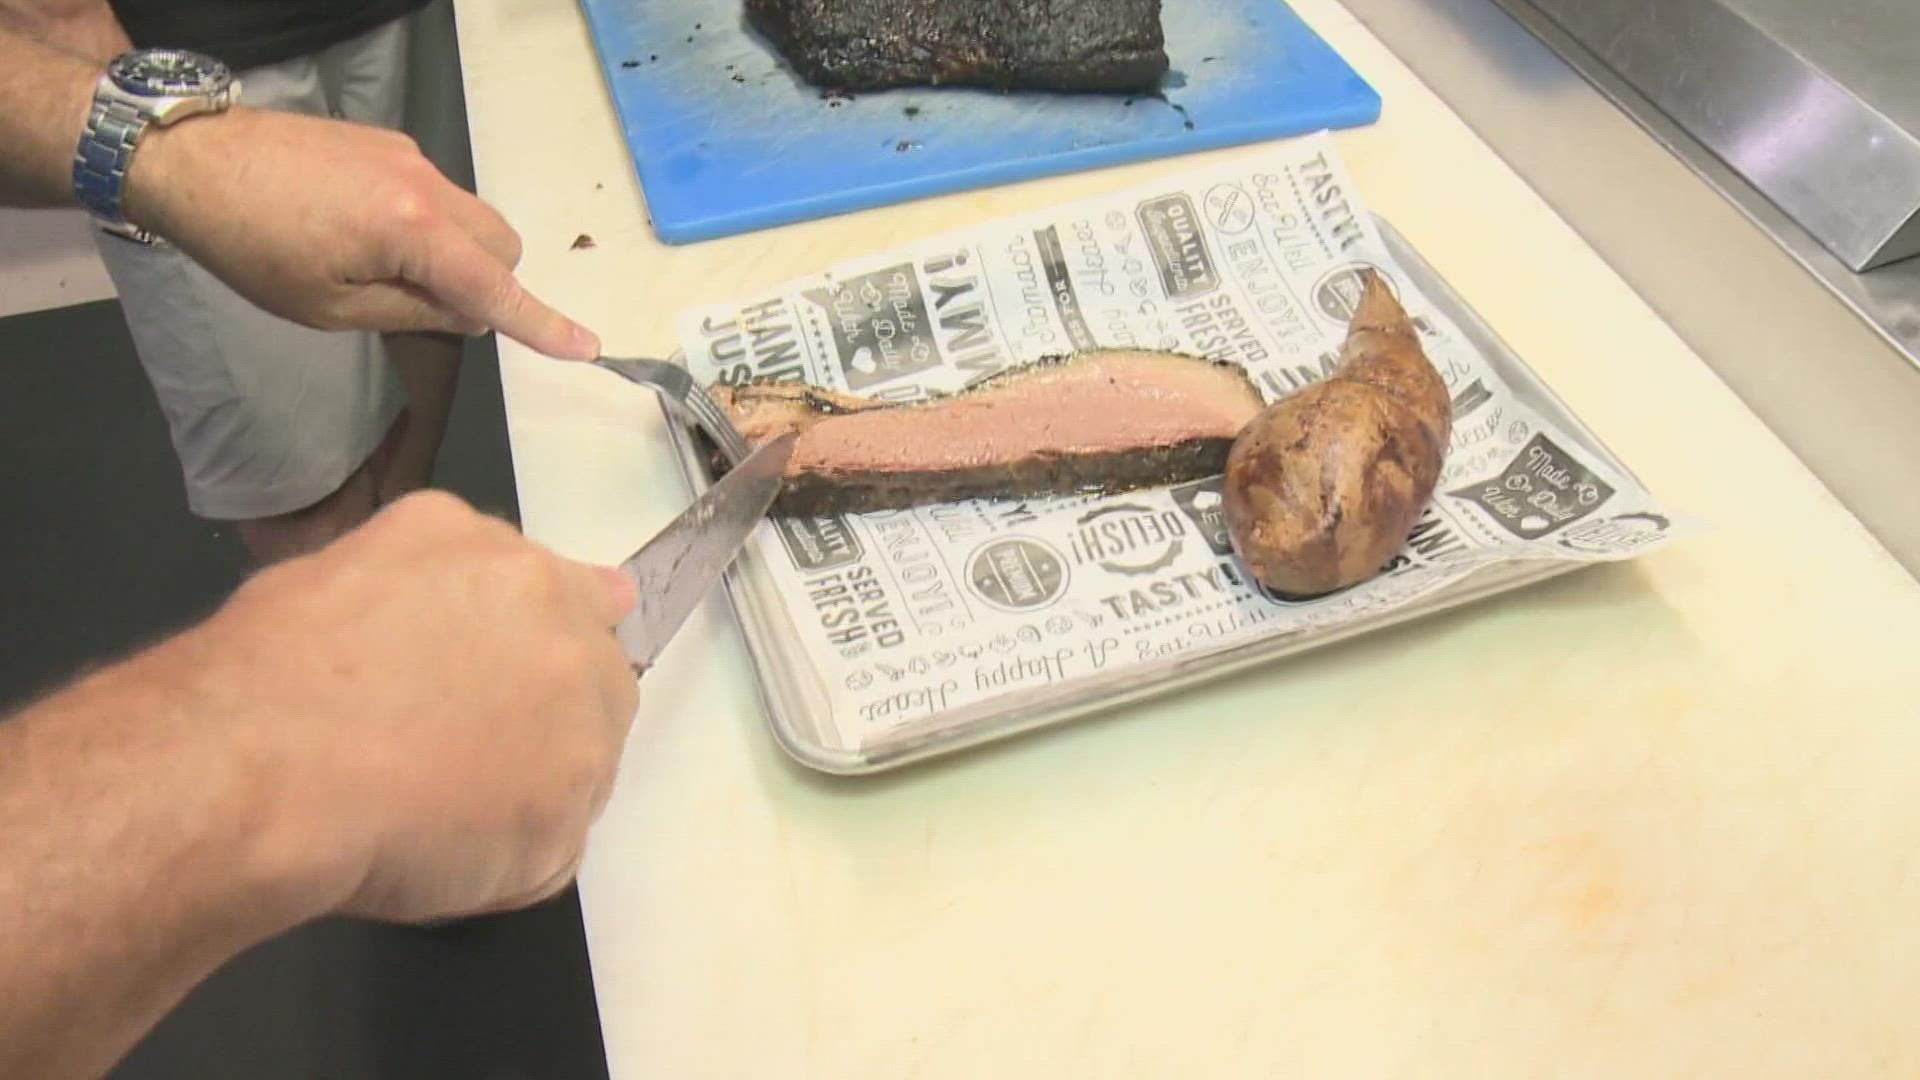 Tom Sherry takes a trip to Coeur d'Alene to visit the smokehouse and learn more about they make their delicious smoked brisket.